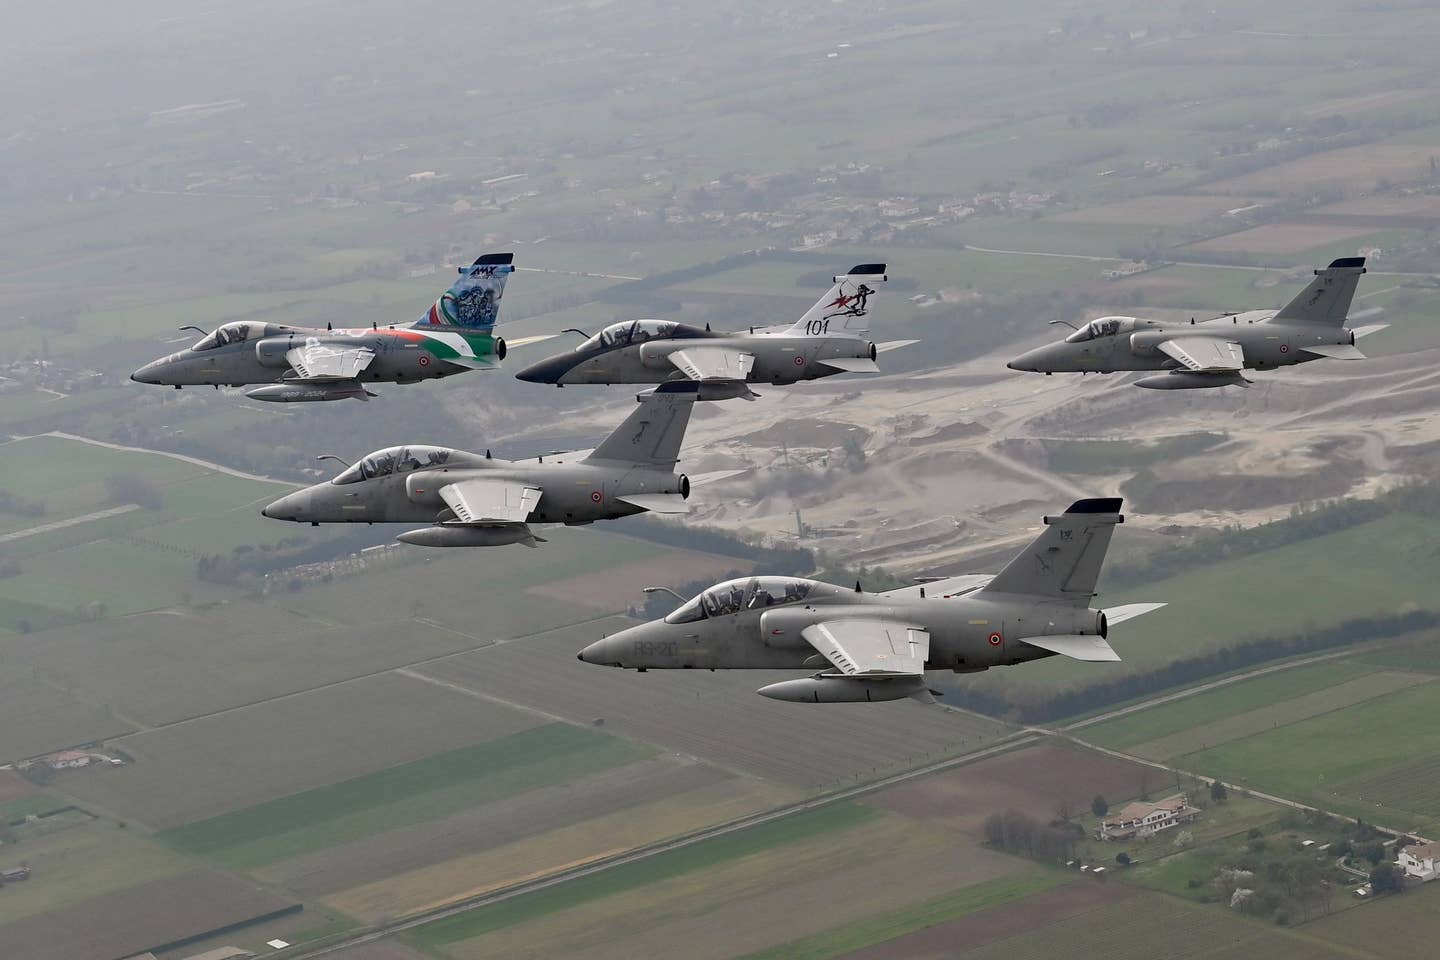 The last five AMX aircraft at Istrana: Three two-seaters and a pair of single-seaters. <em>Italian Air Force</em>